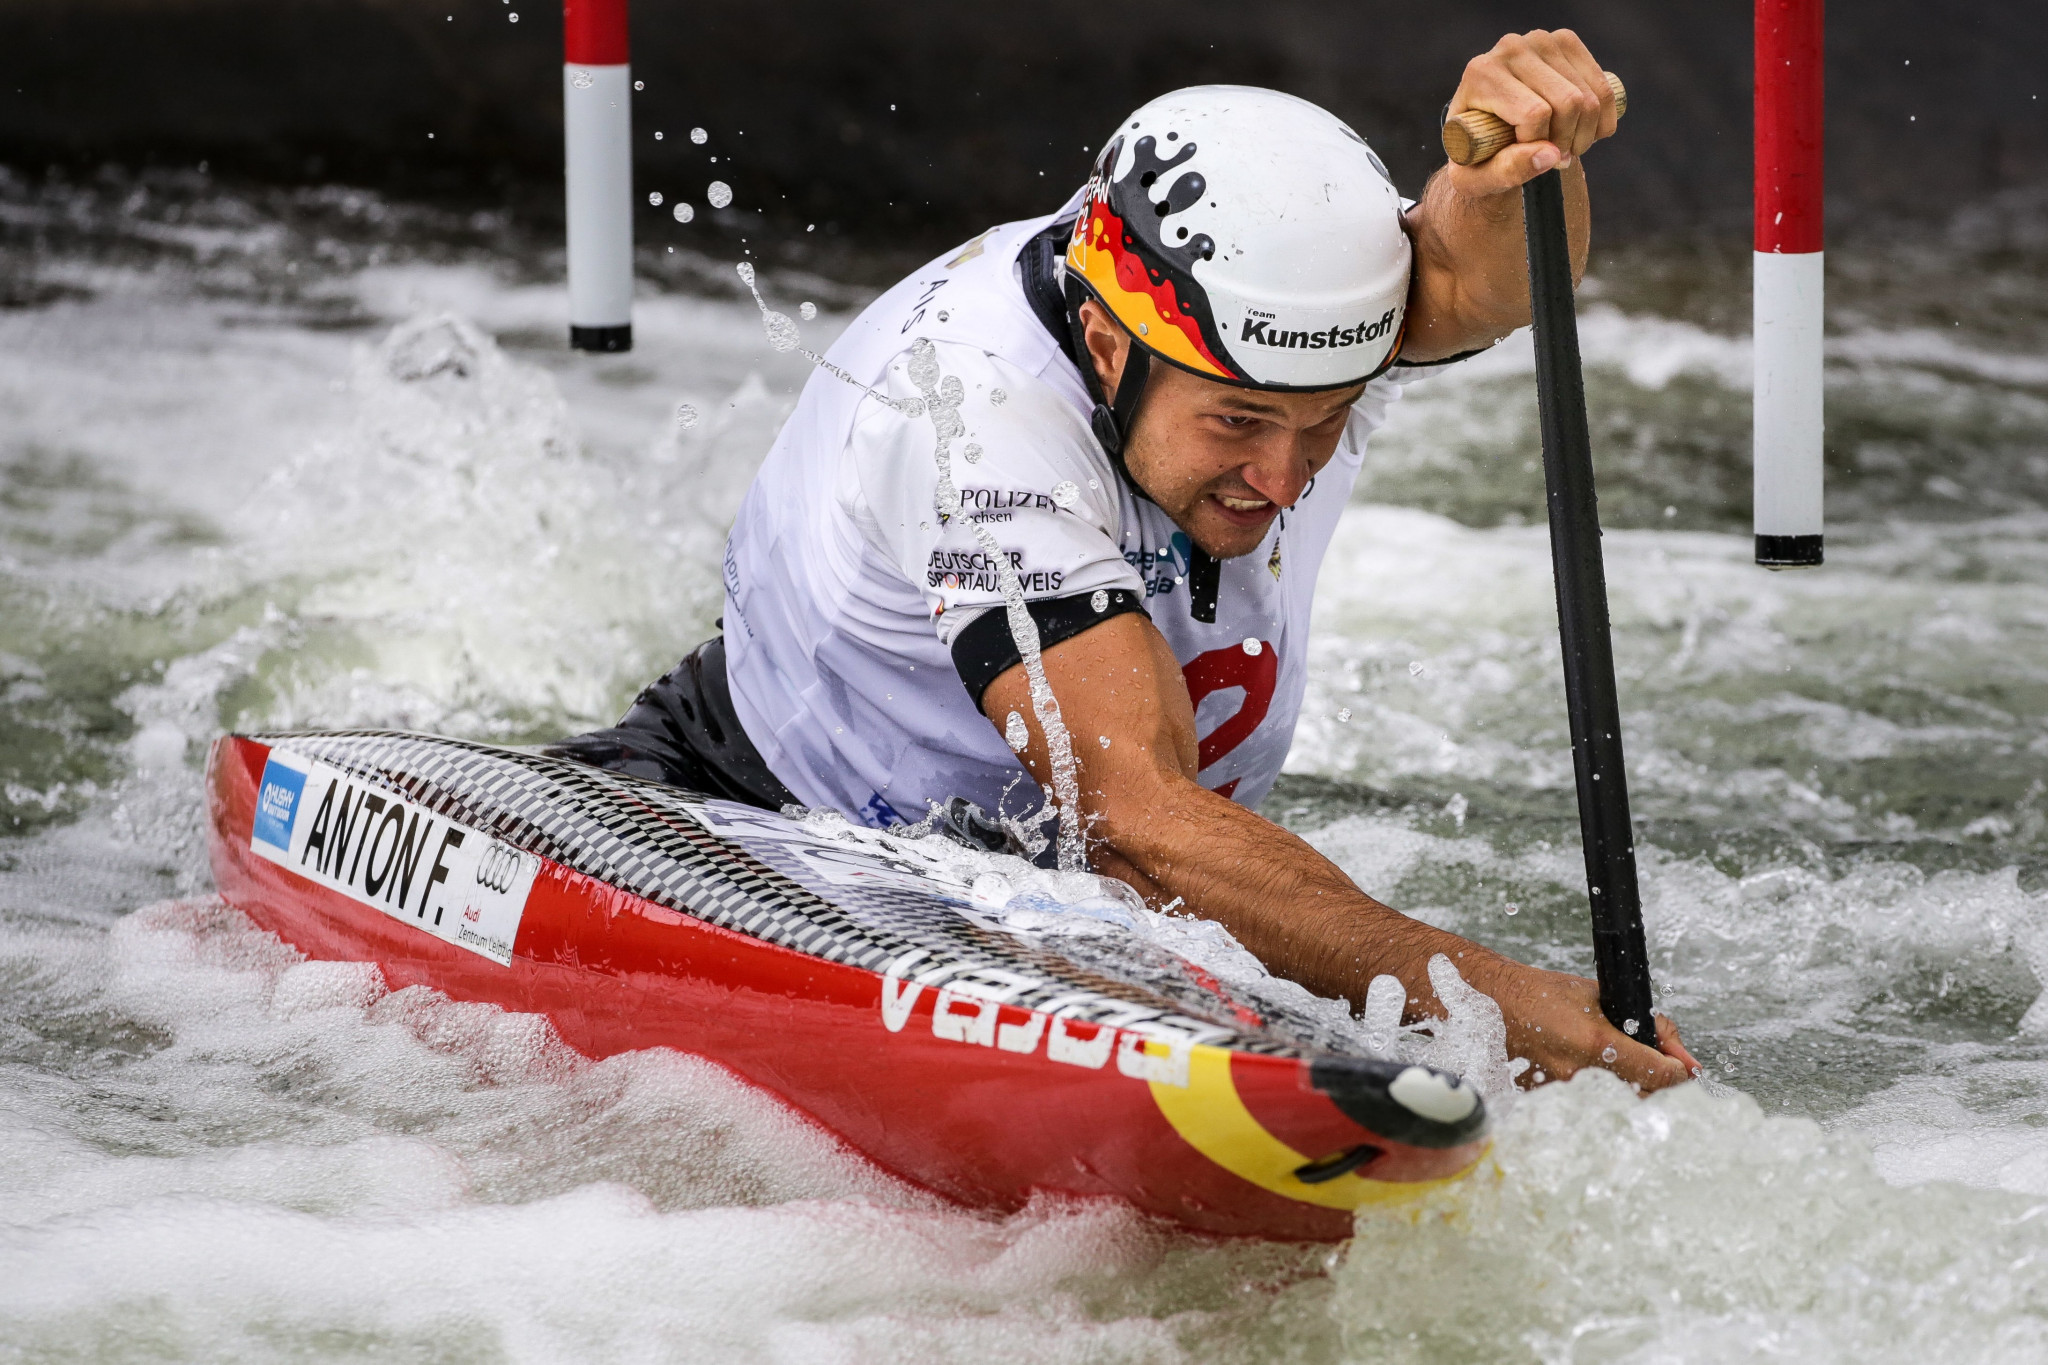 Germany's world champion Franz Anton triumphed in the men's C1 event ©Paddle Australia